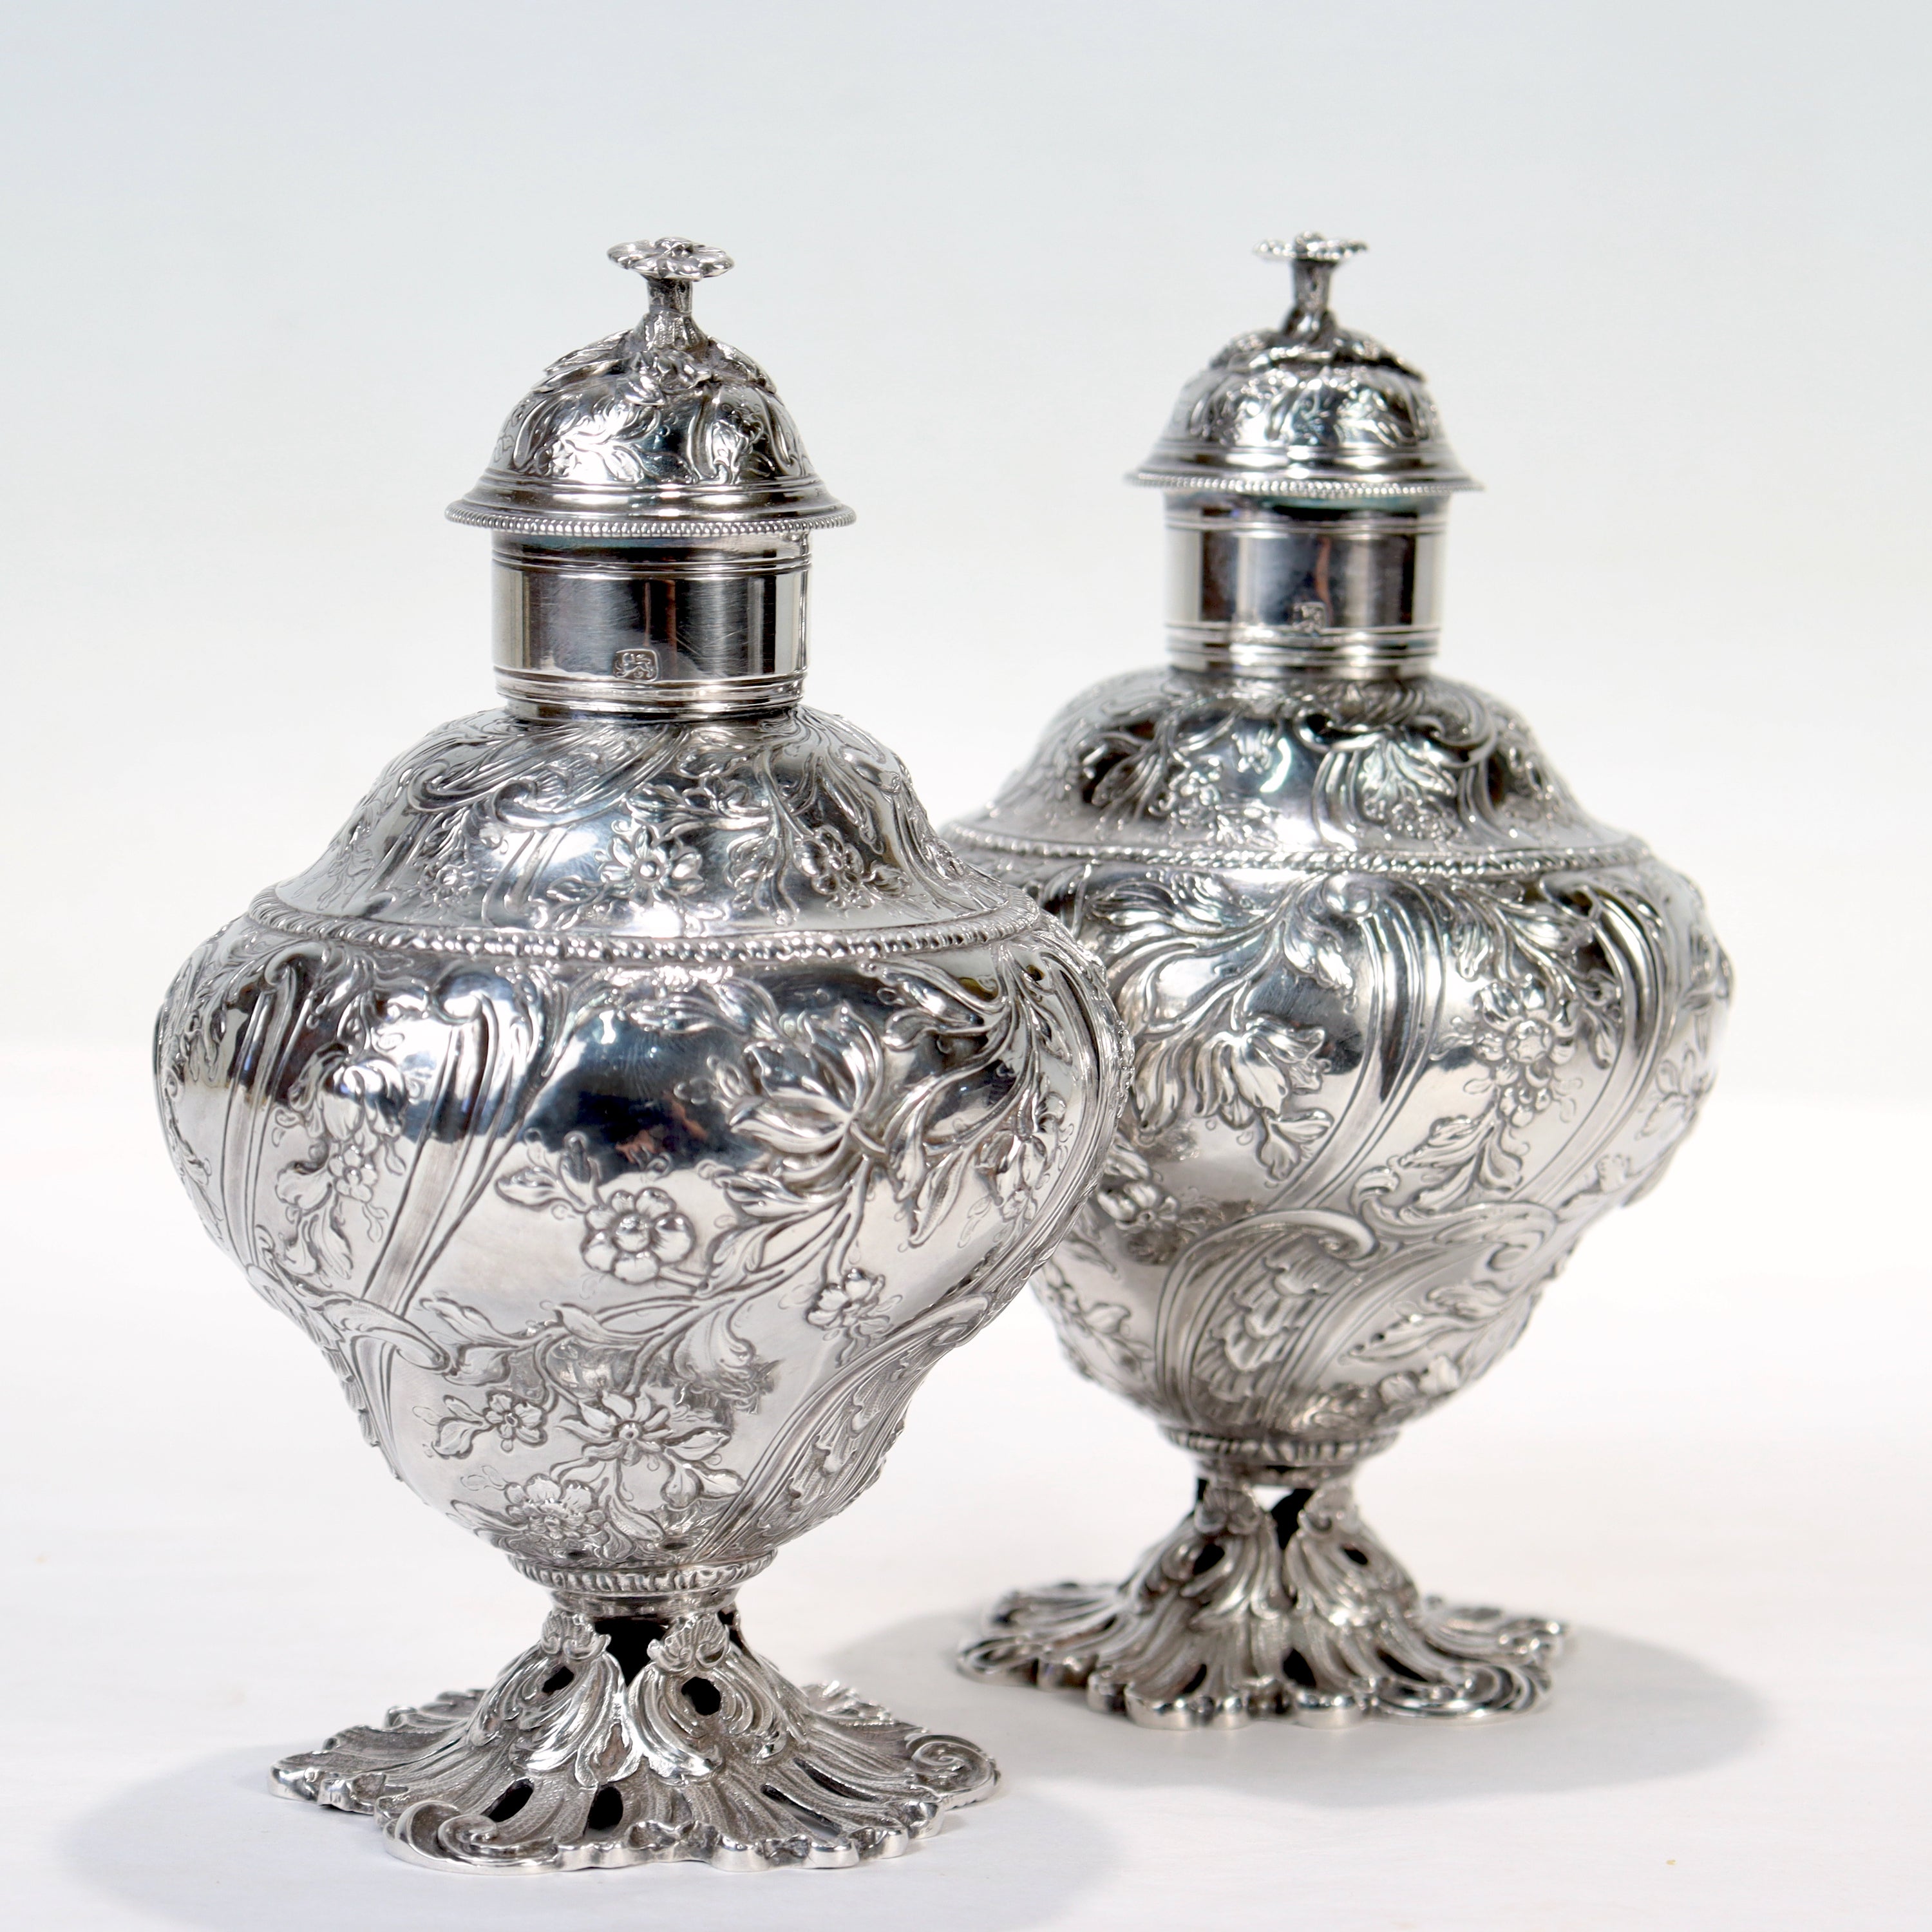 A fine matched pair of English 18th century tea caddies.

In sterling silver.

Marked for Francis Crump, London, and 1758.

Having central cartouches bearing an engraved heraldic banner with scallop shells, slightly lobed bodies with a left hand